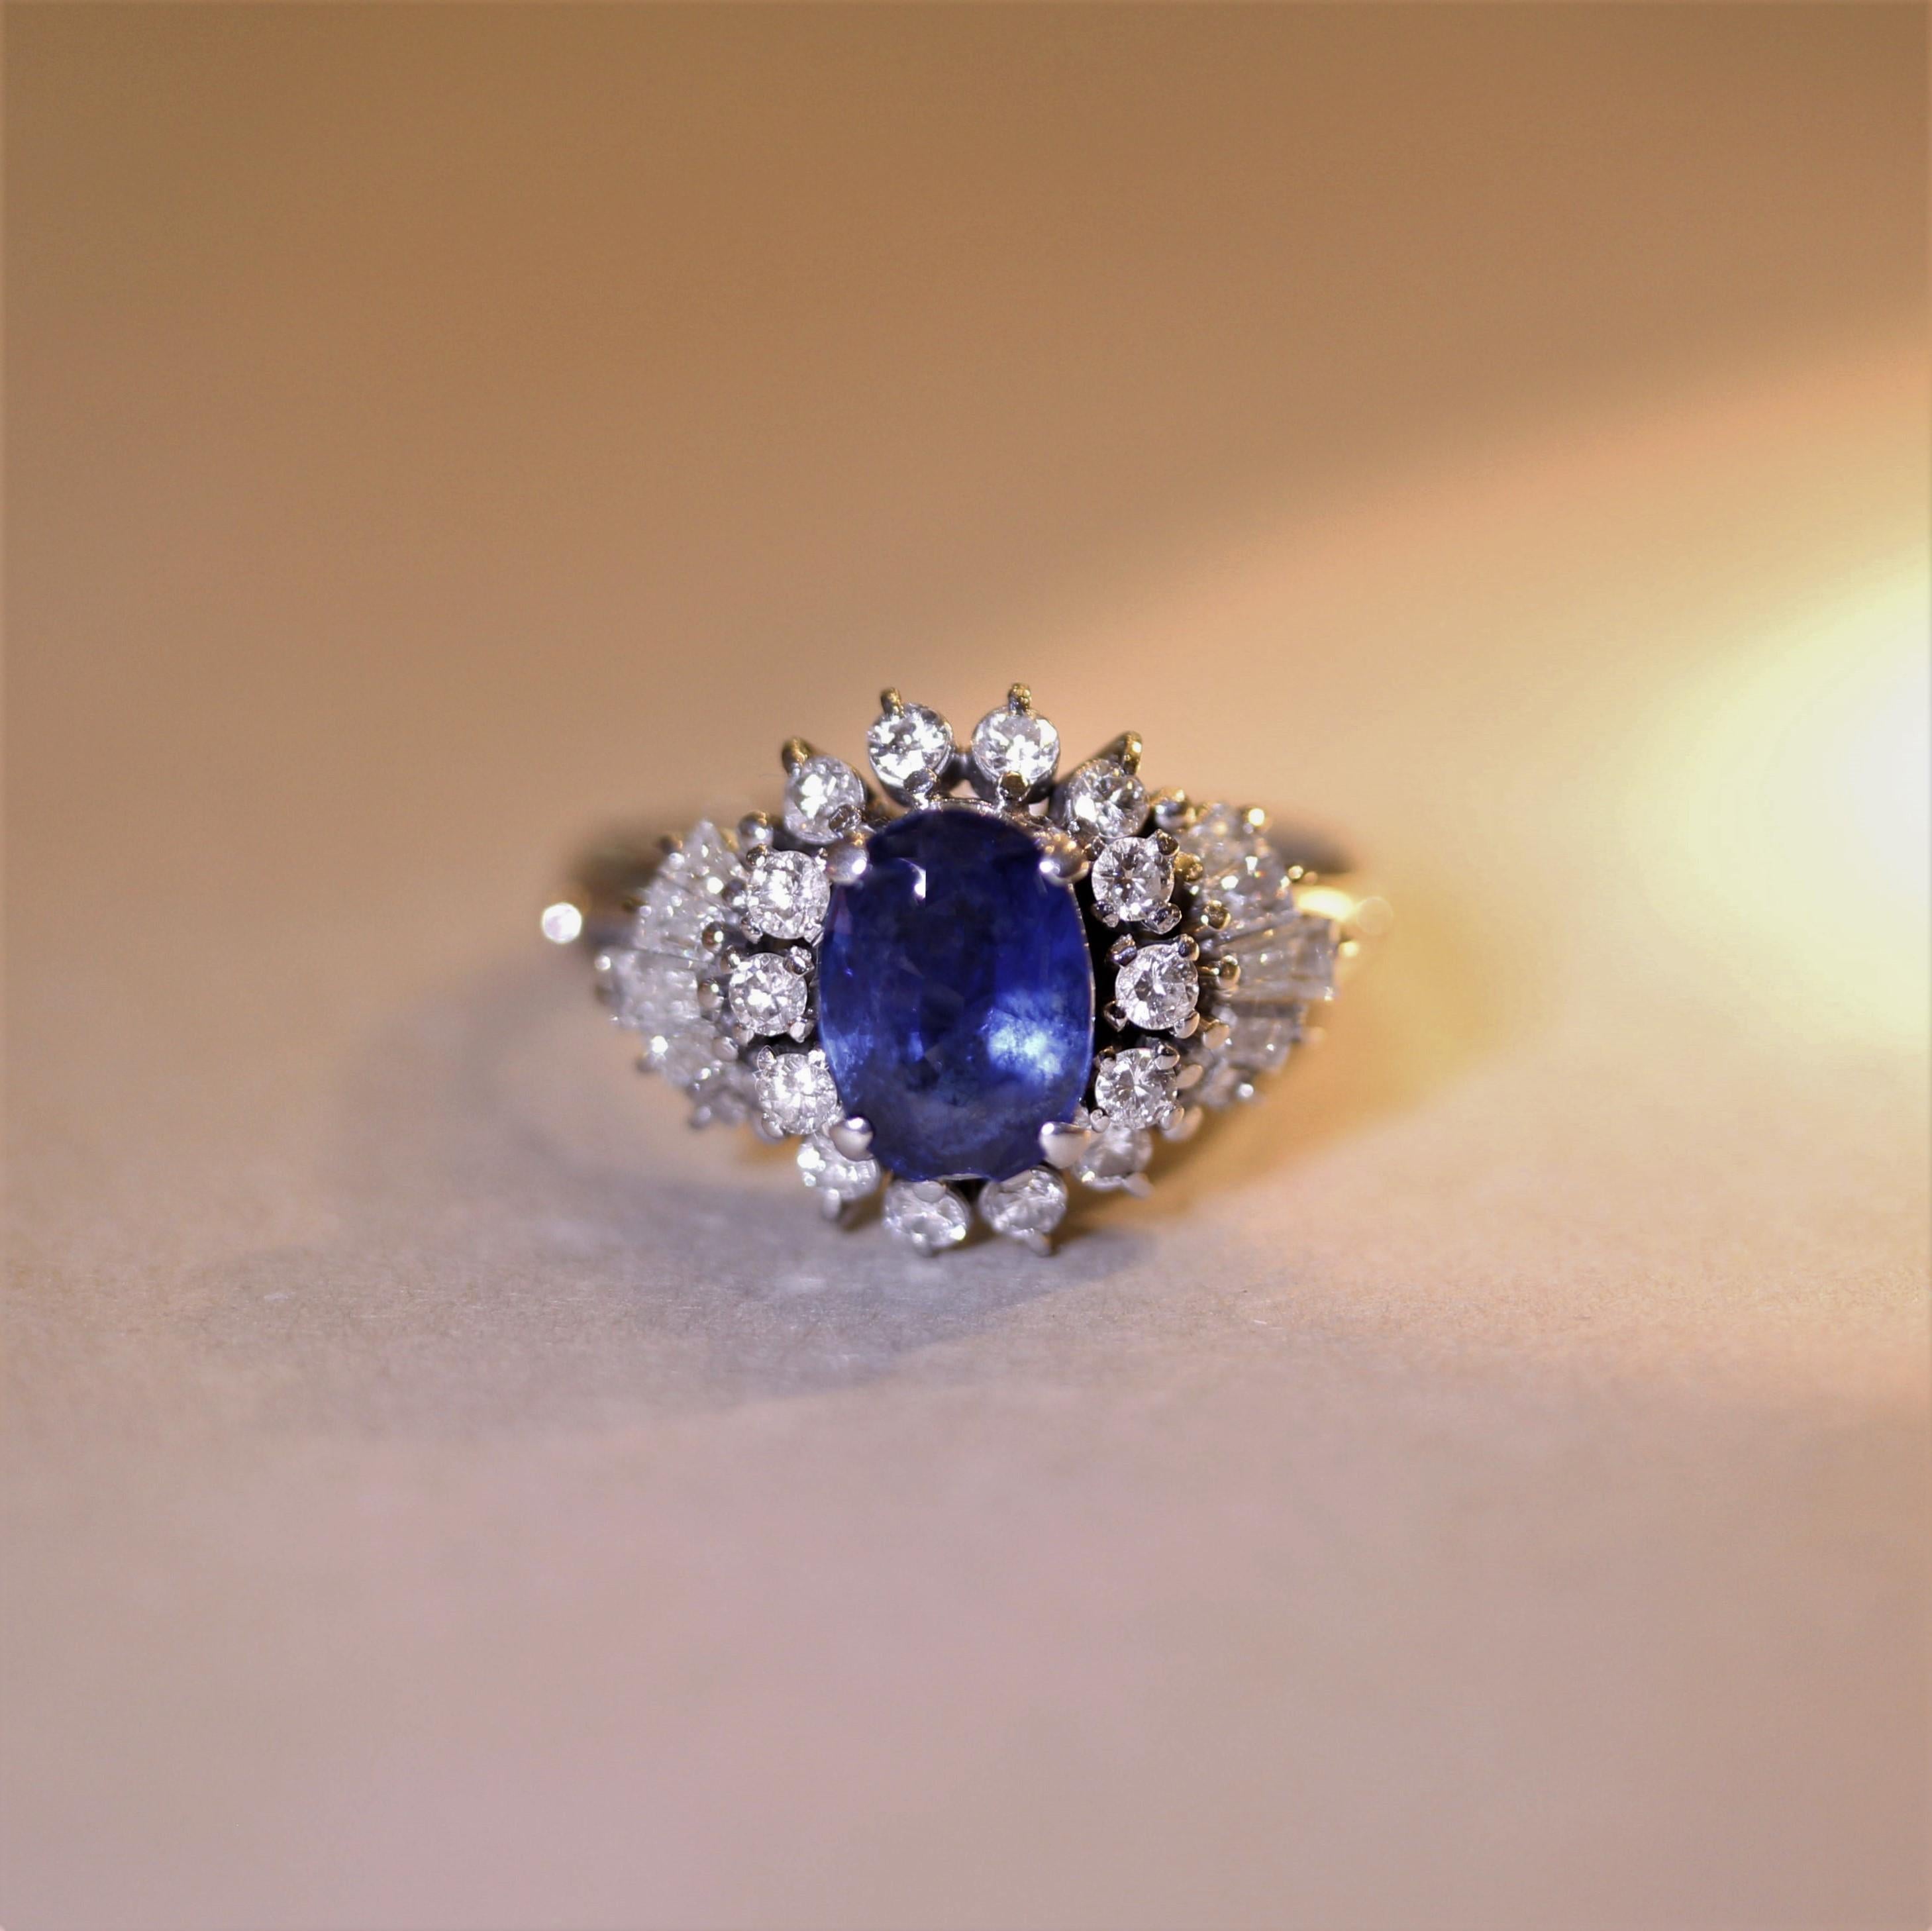 A chic and sexy sapphire ring! It features a beautiful 2.03 carat sapphire with an even vivid blue color and is shaped as an oval. It is accented by 0.88 carats of round brilliant-cut and baguette-cut diamonds which are set around the sapphire in a